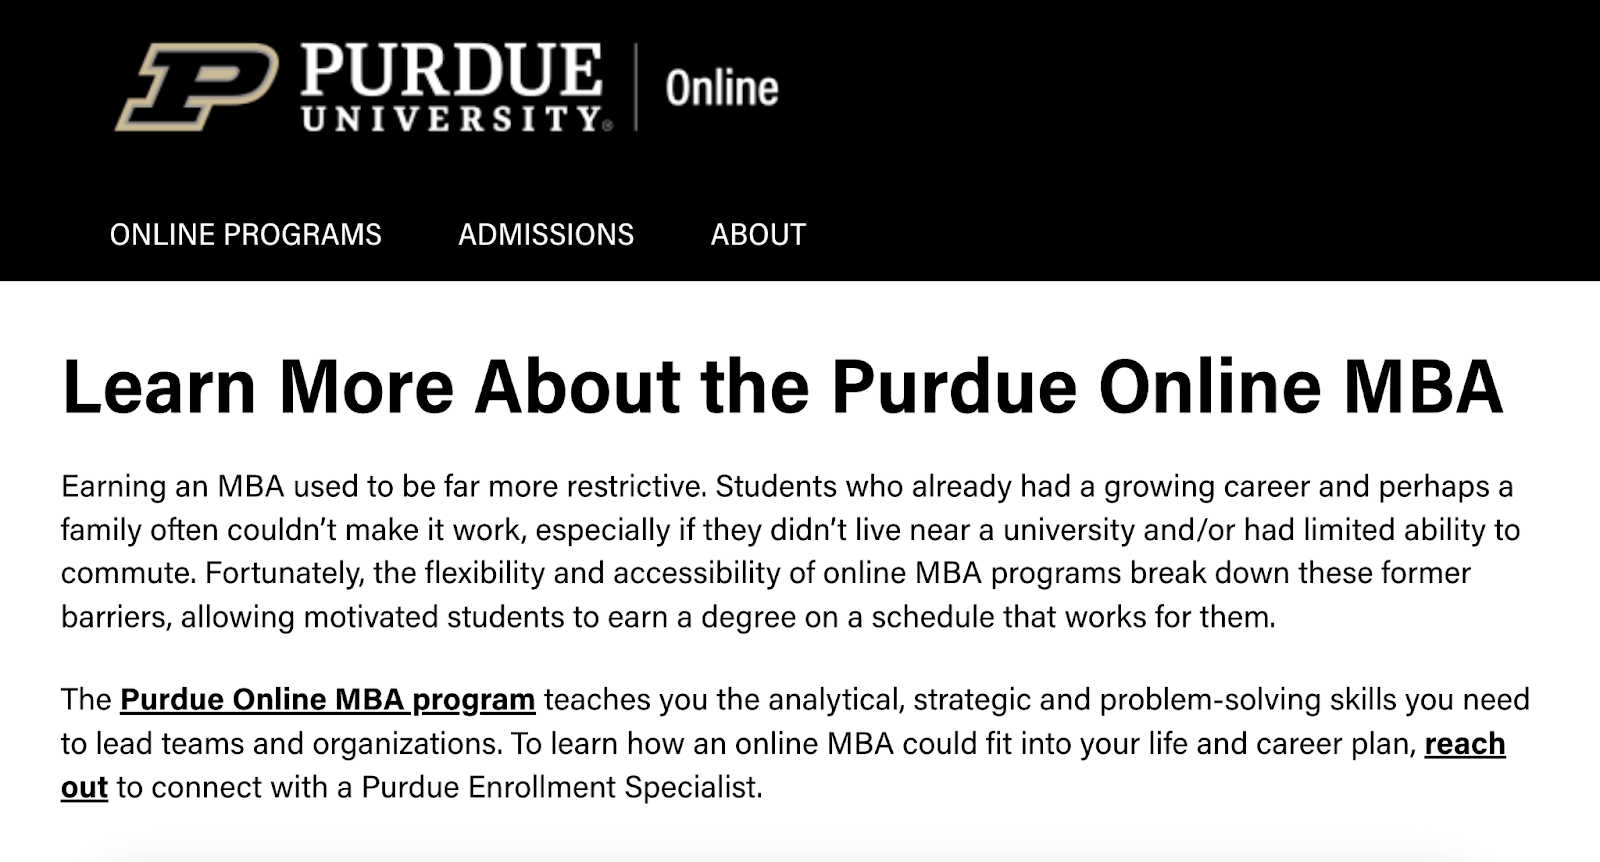  "Learn More About the Purdue Online MBA"